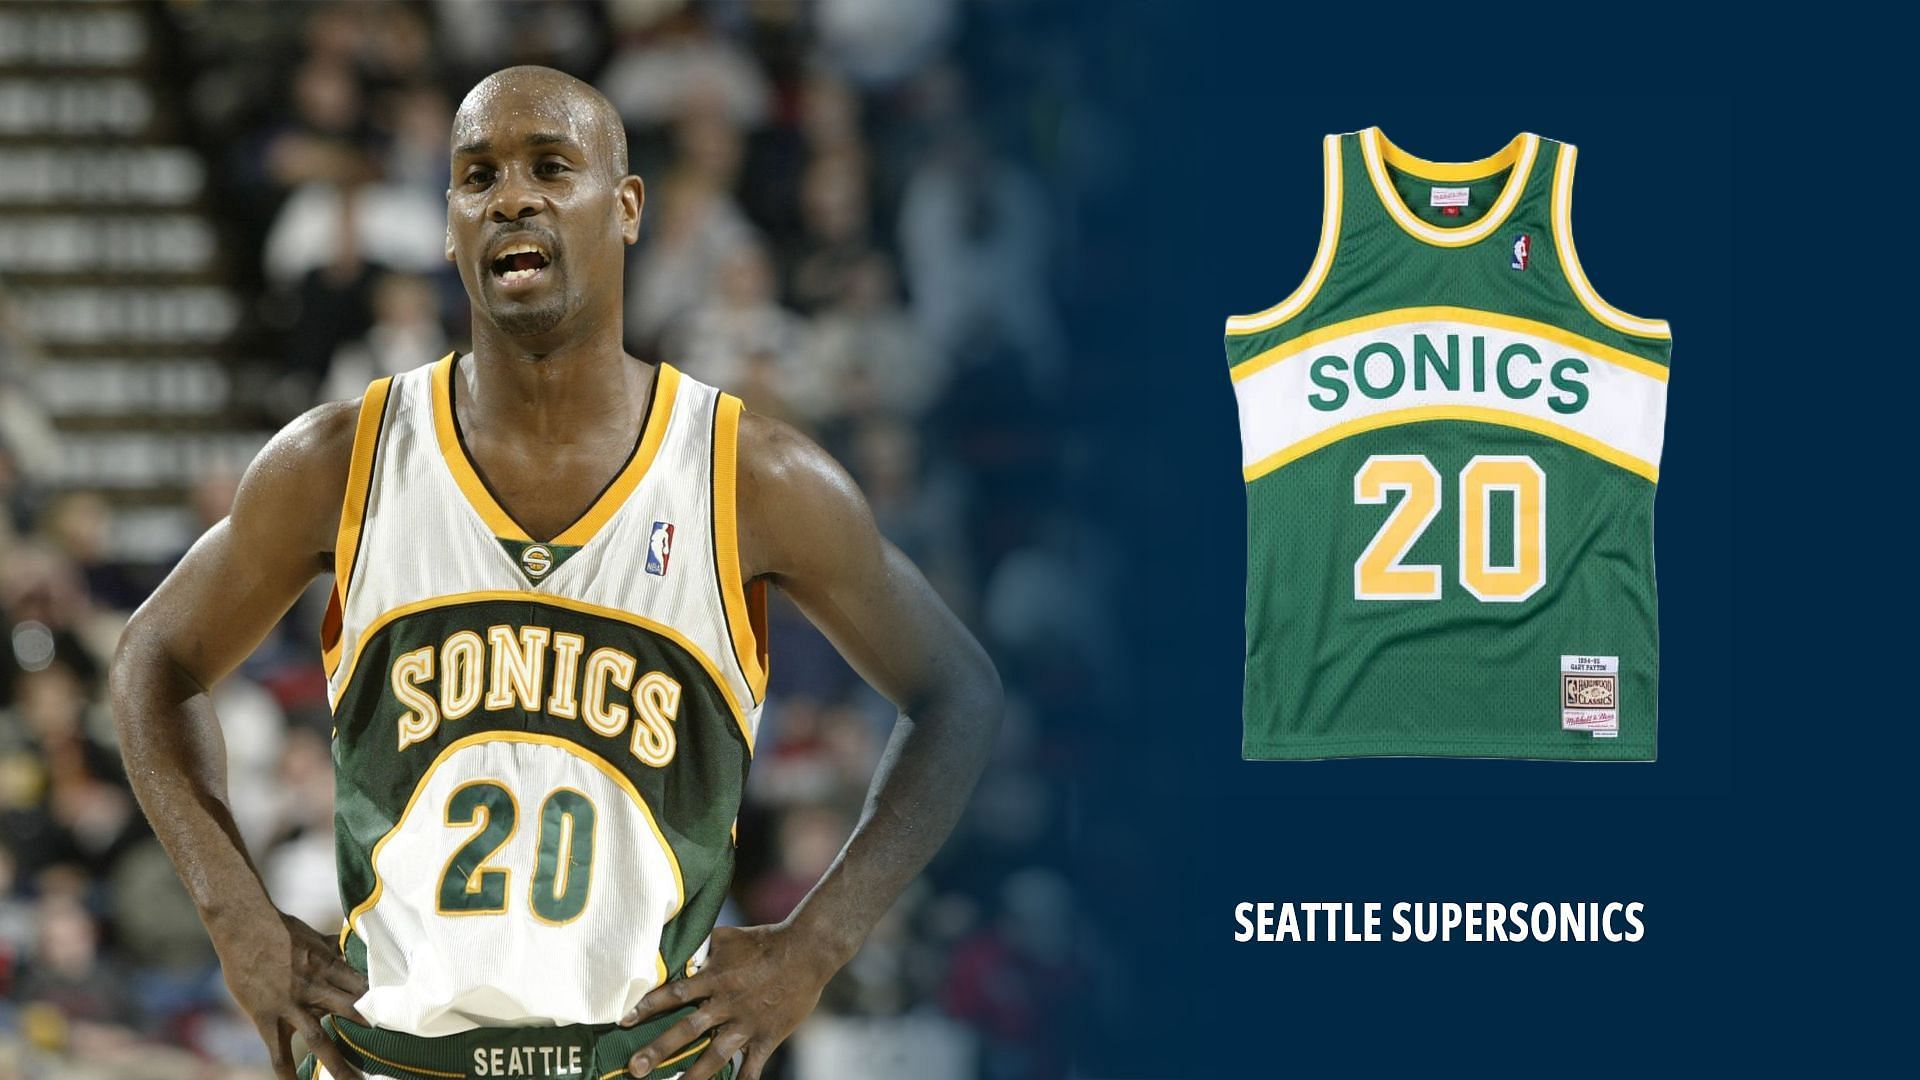 The Seattle SuperSonics had fantastic jerseys during their time in the NBA